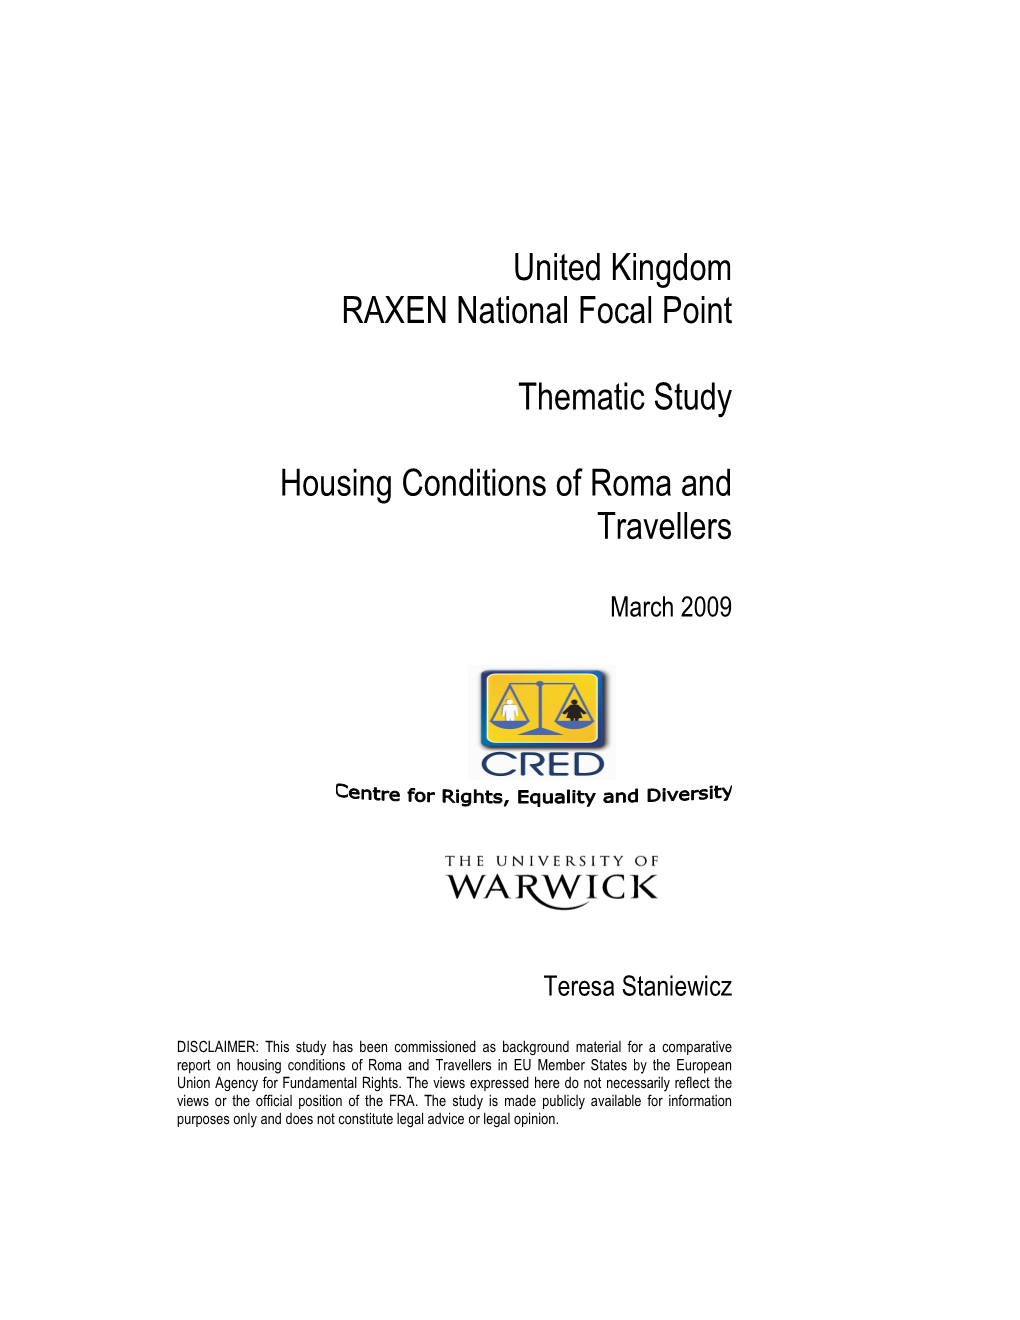 United Kingdom RAXEN National Focal Point Thematic Study